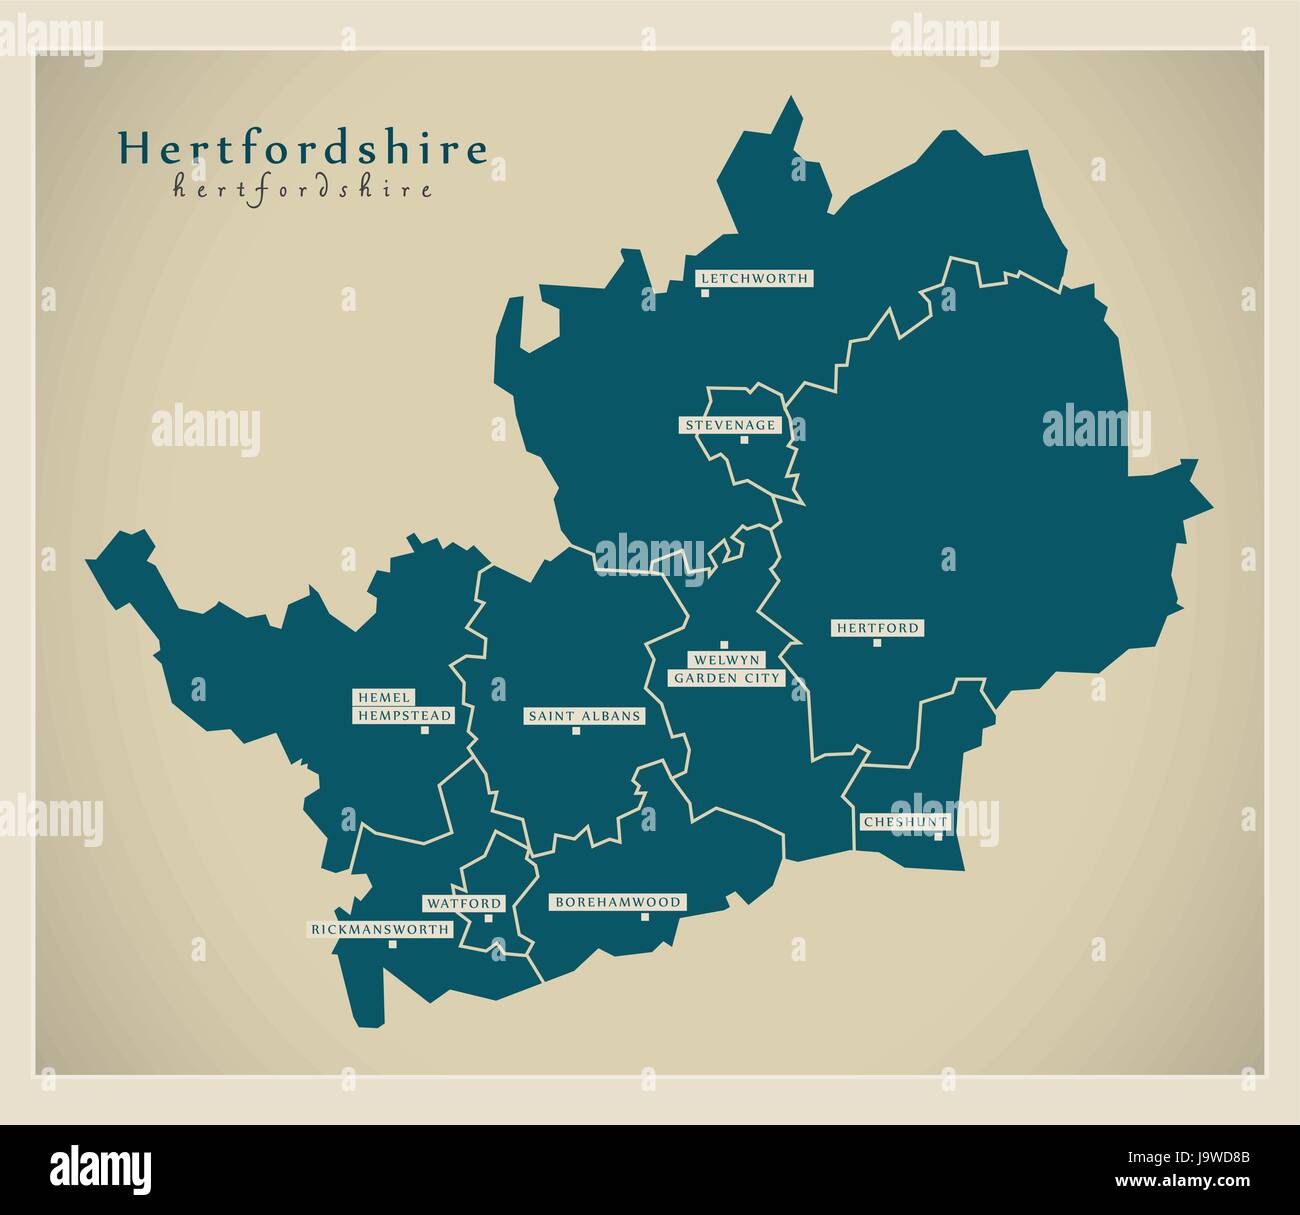 map of hertfordshire county Modern Map Hertfordshire County With Districts Uk Illustration map of hertfordshire county